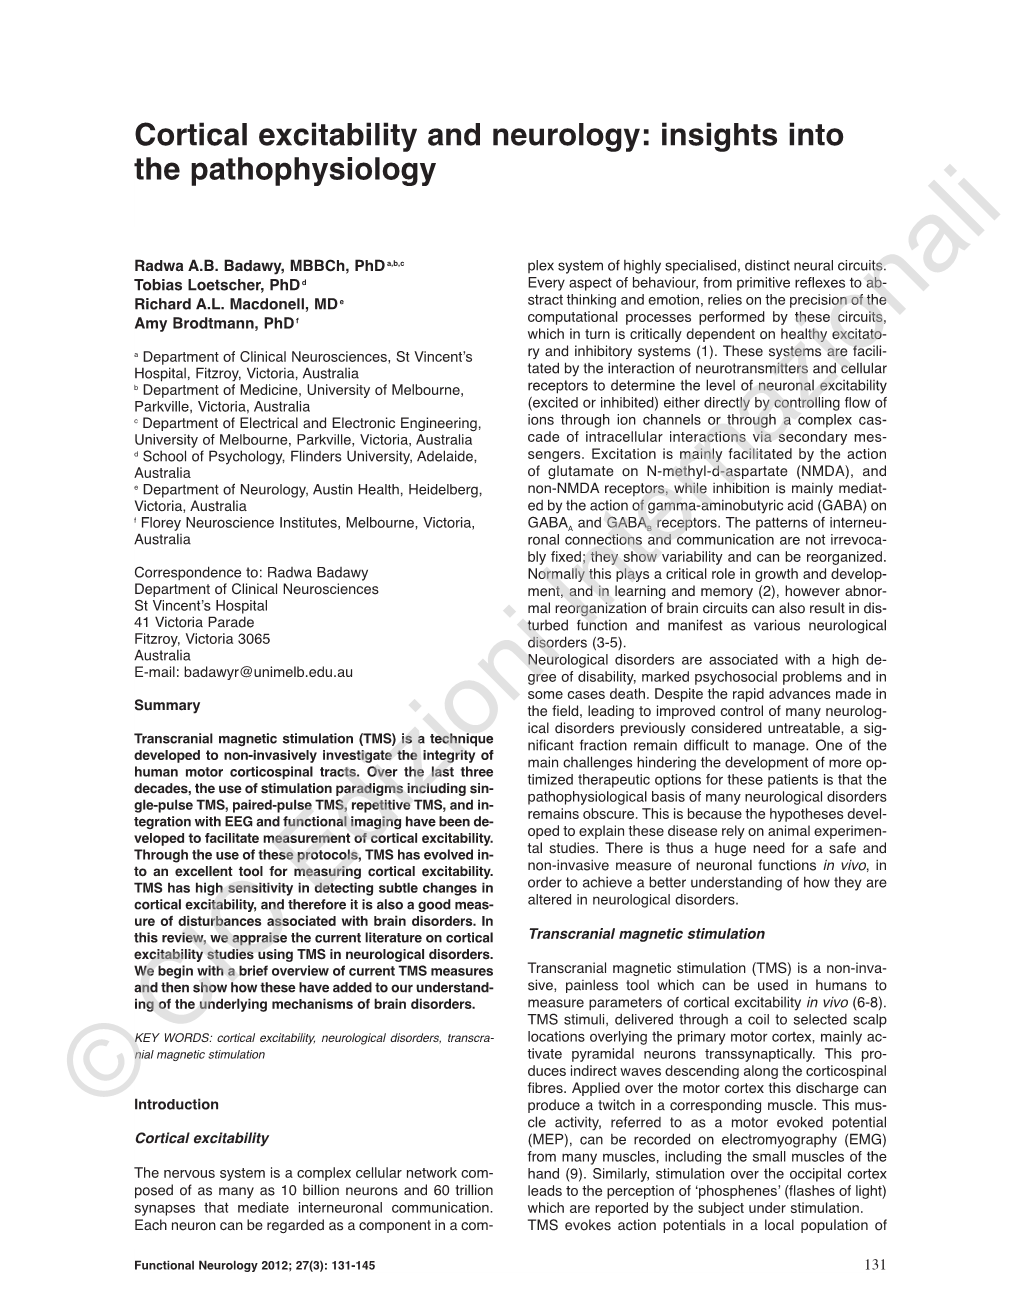 Cortical Excitability and Neurology: Insights Into the Pathophysiology